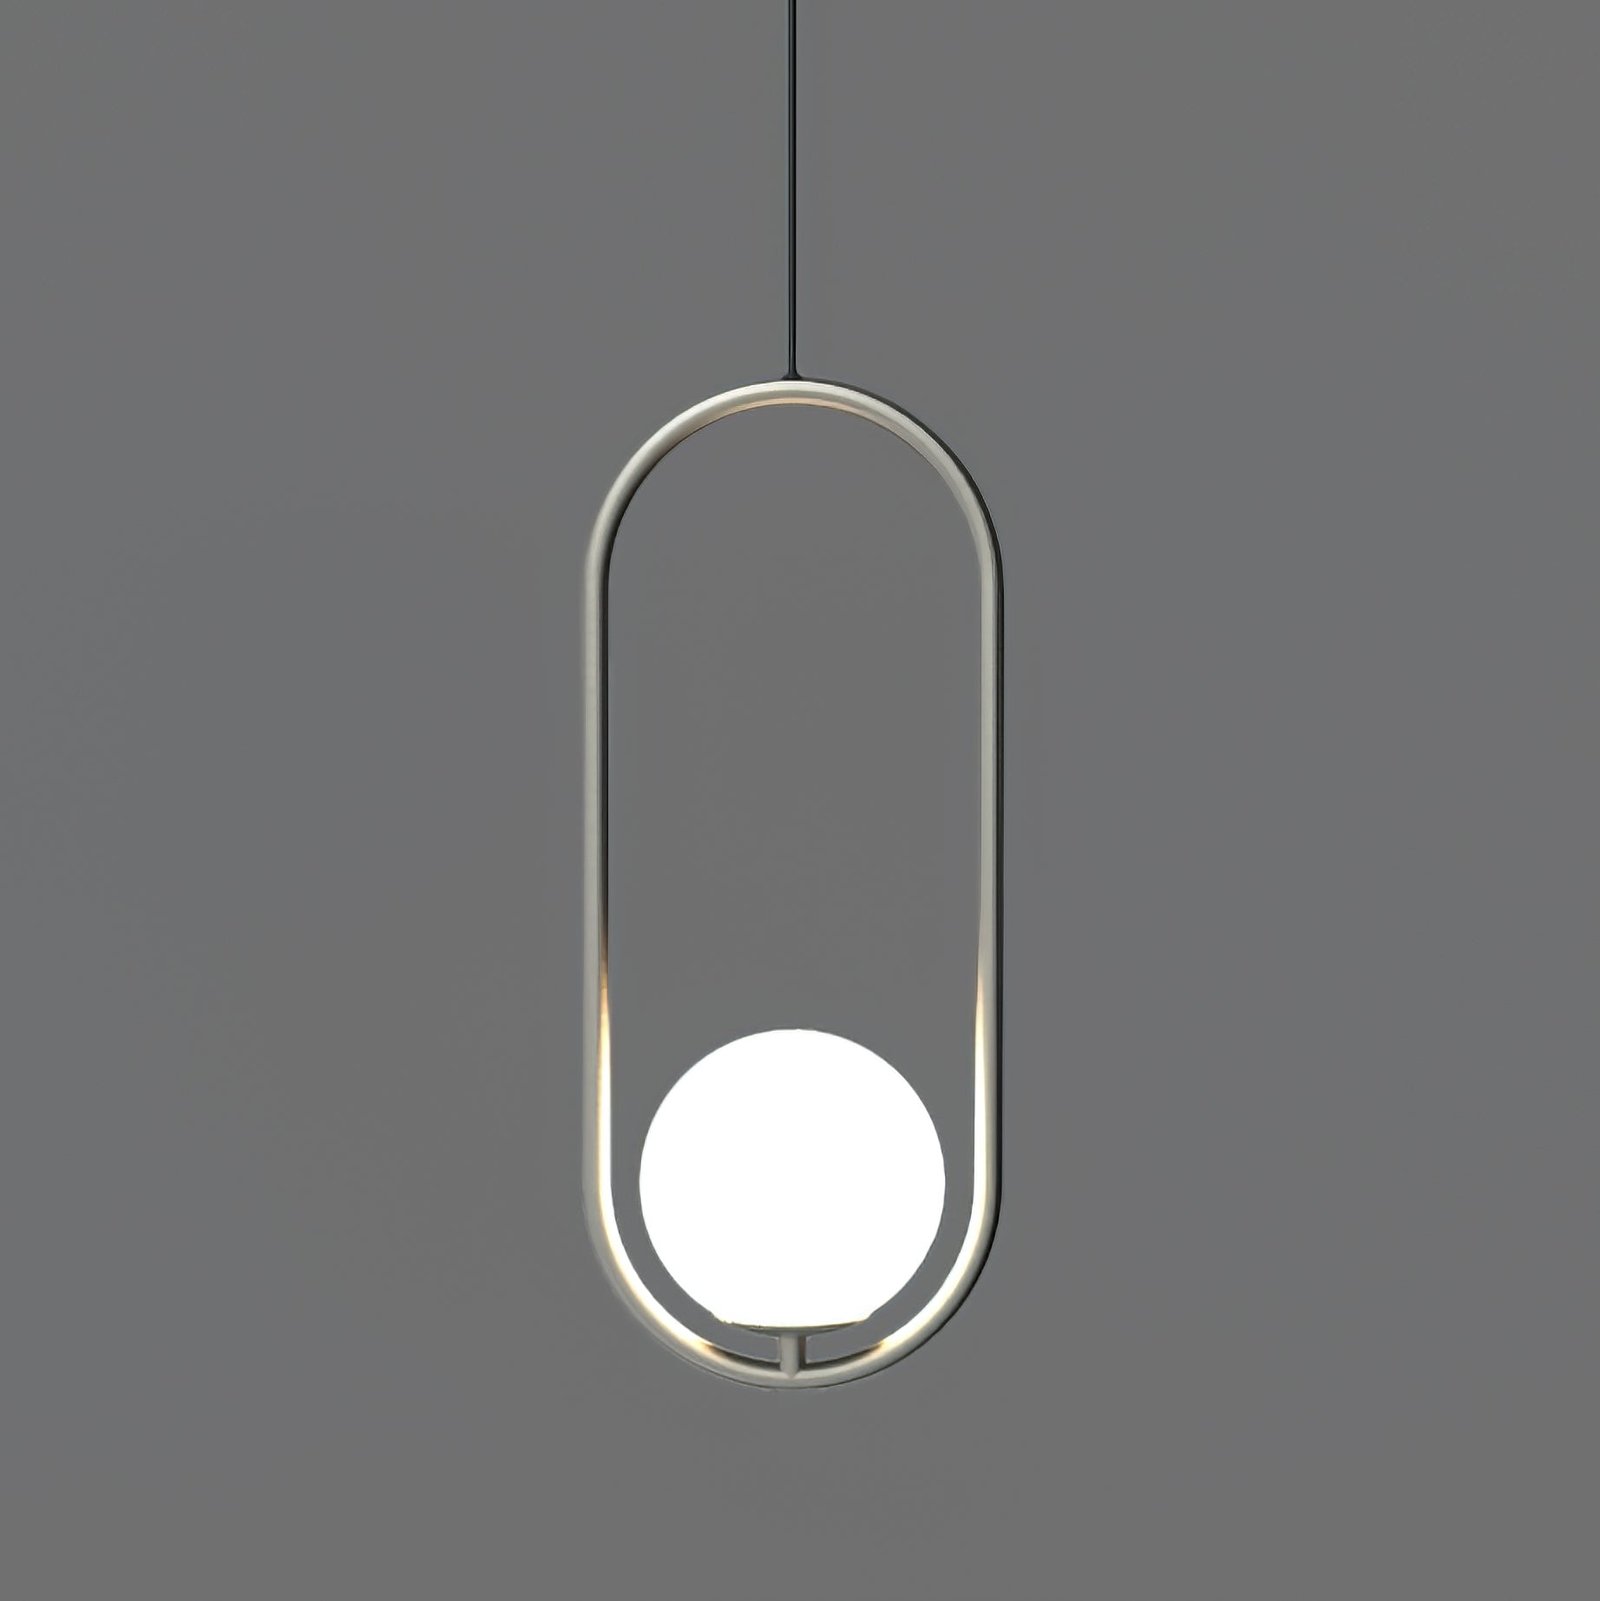 Rephrase: Mila Pendant Lamp in Silver with a Diameter of 9.8 inches and a Height of 19.7 inches (25cm x 50cm)